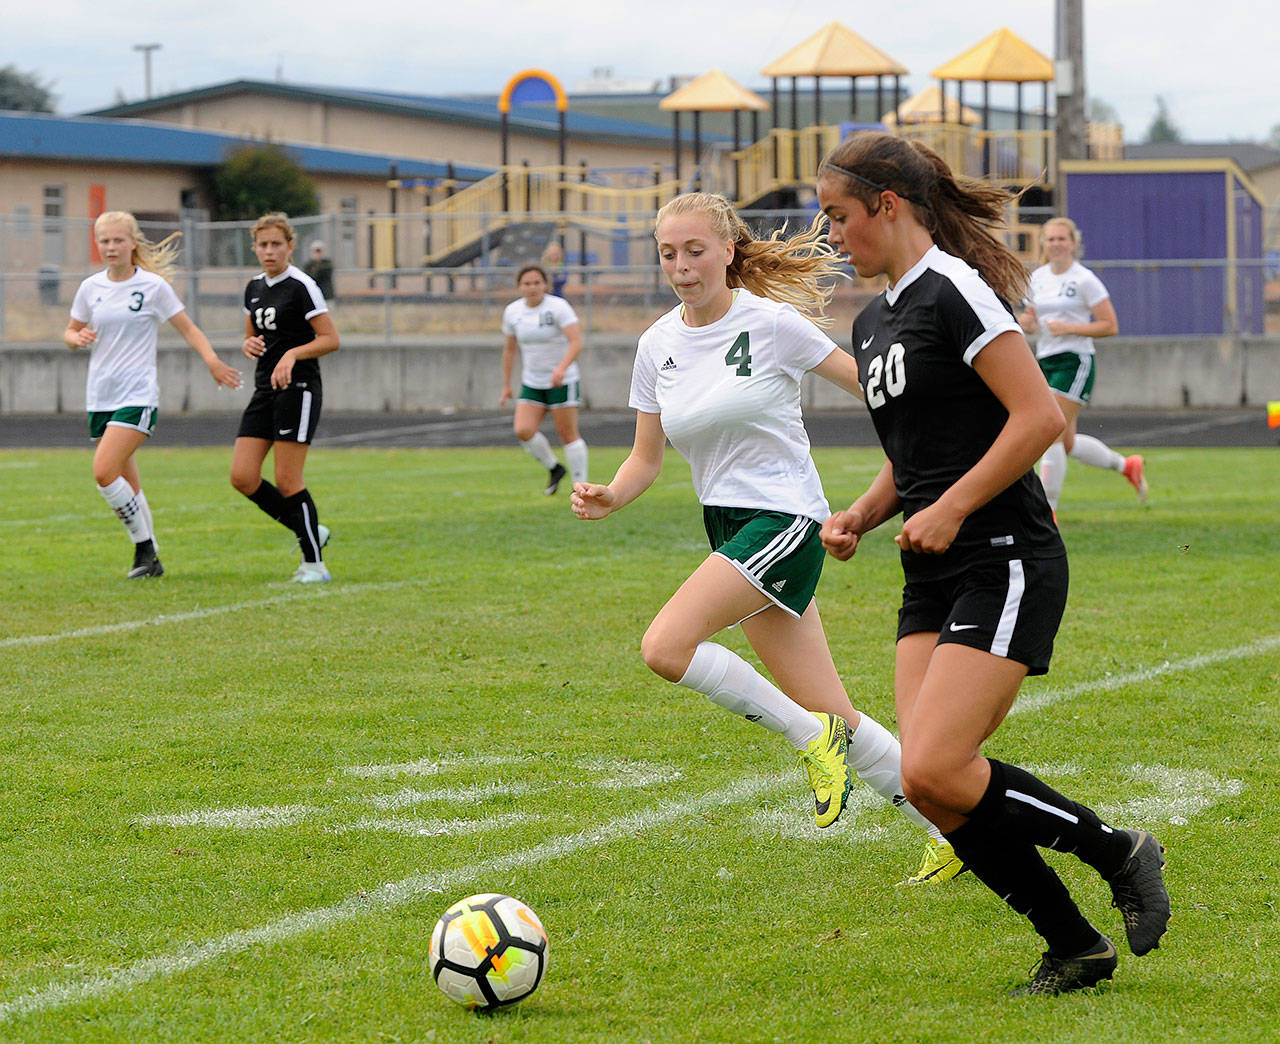 Girls soccer: Roughriders dominate Wolves in Sequim